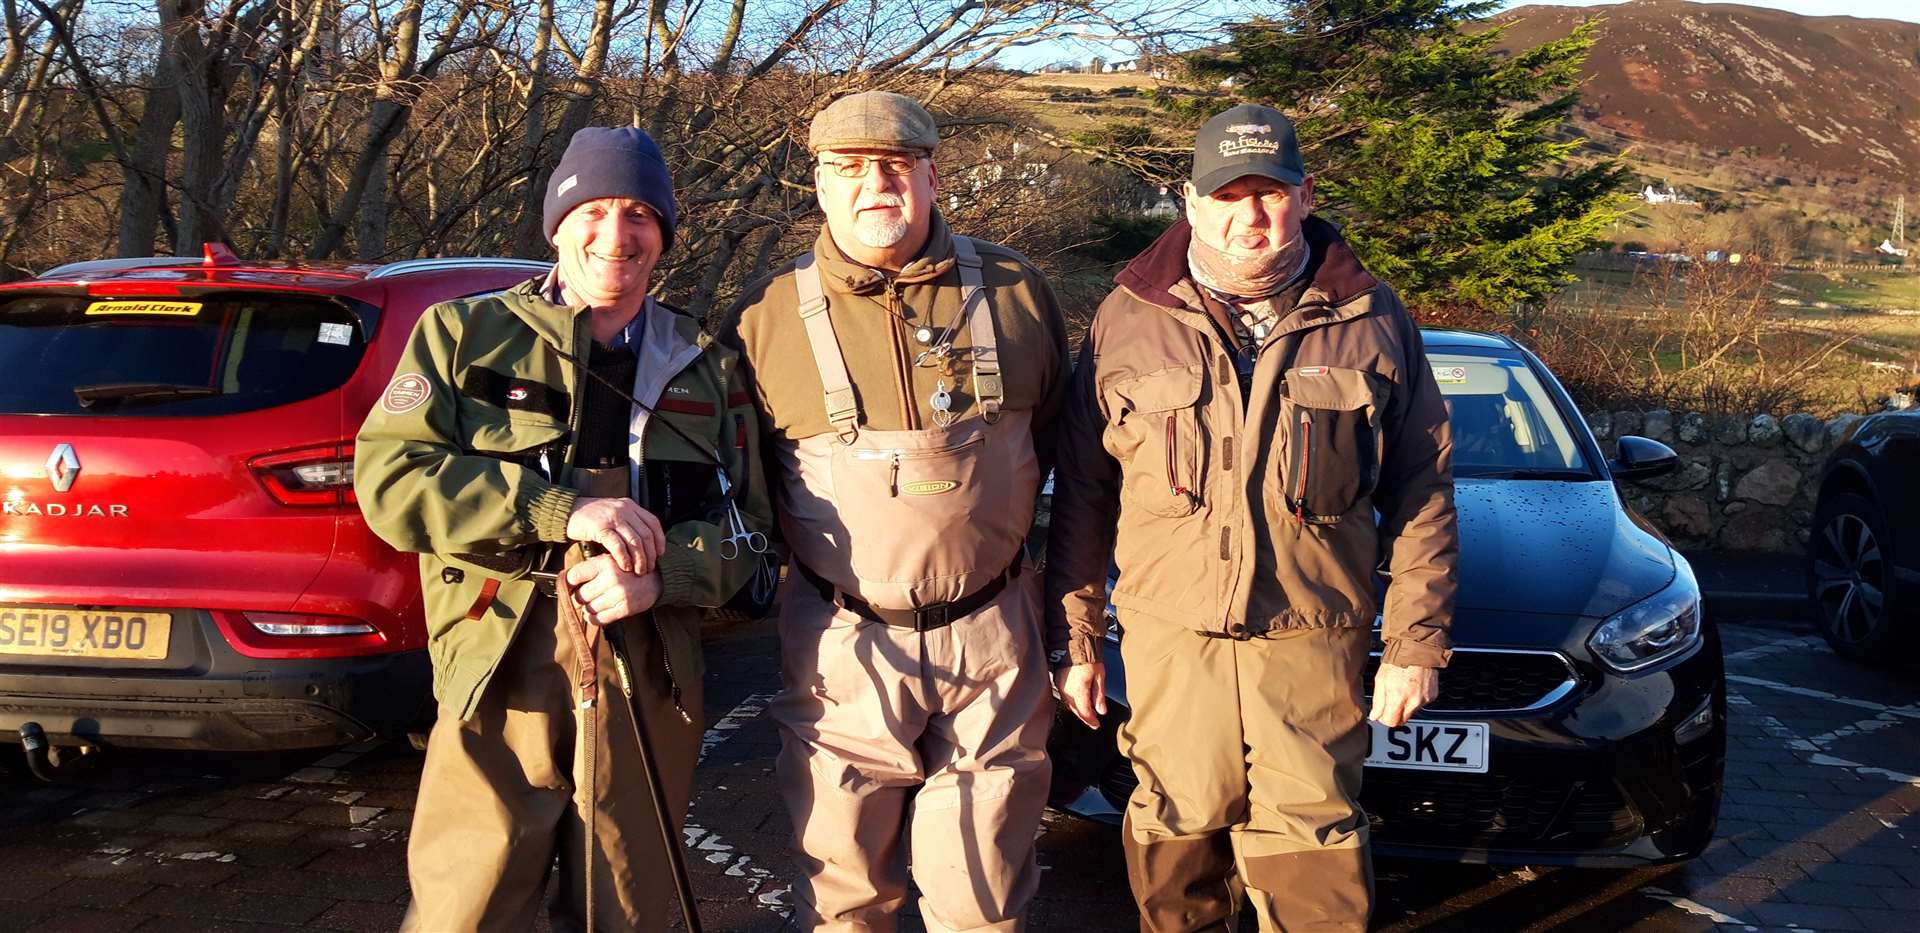 Steve Bruce (centre), Blairgowrie, has been fishing the Helmsdale for 23 years and his brother Neil (right) for 10. However, Alan Miller, left, of Denoon, is a newcomer.